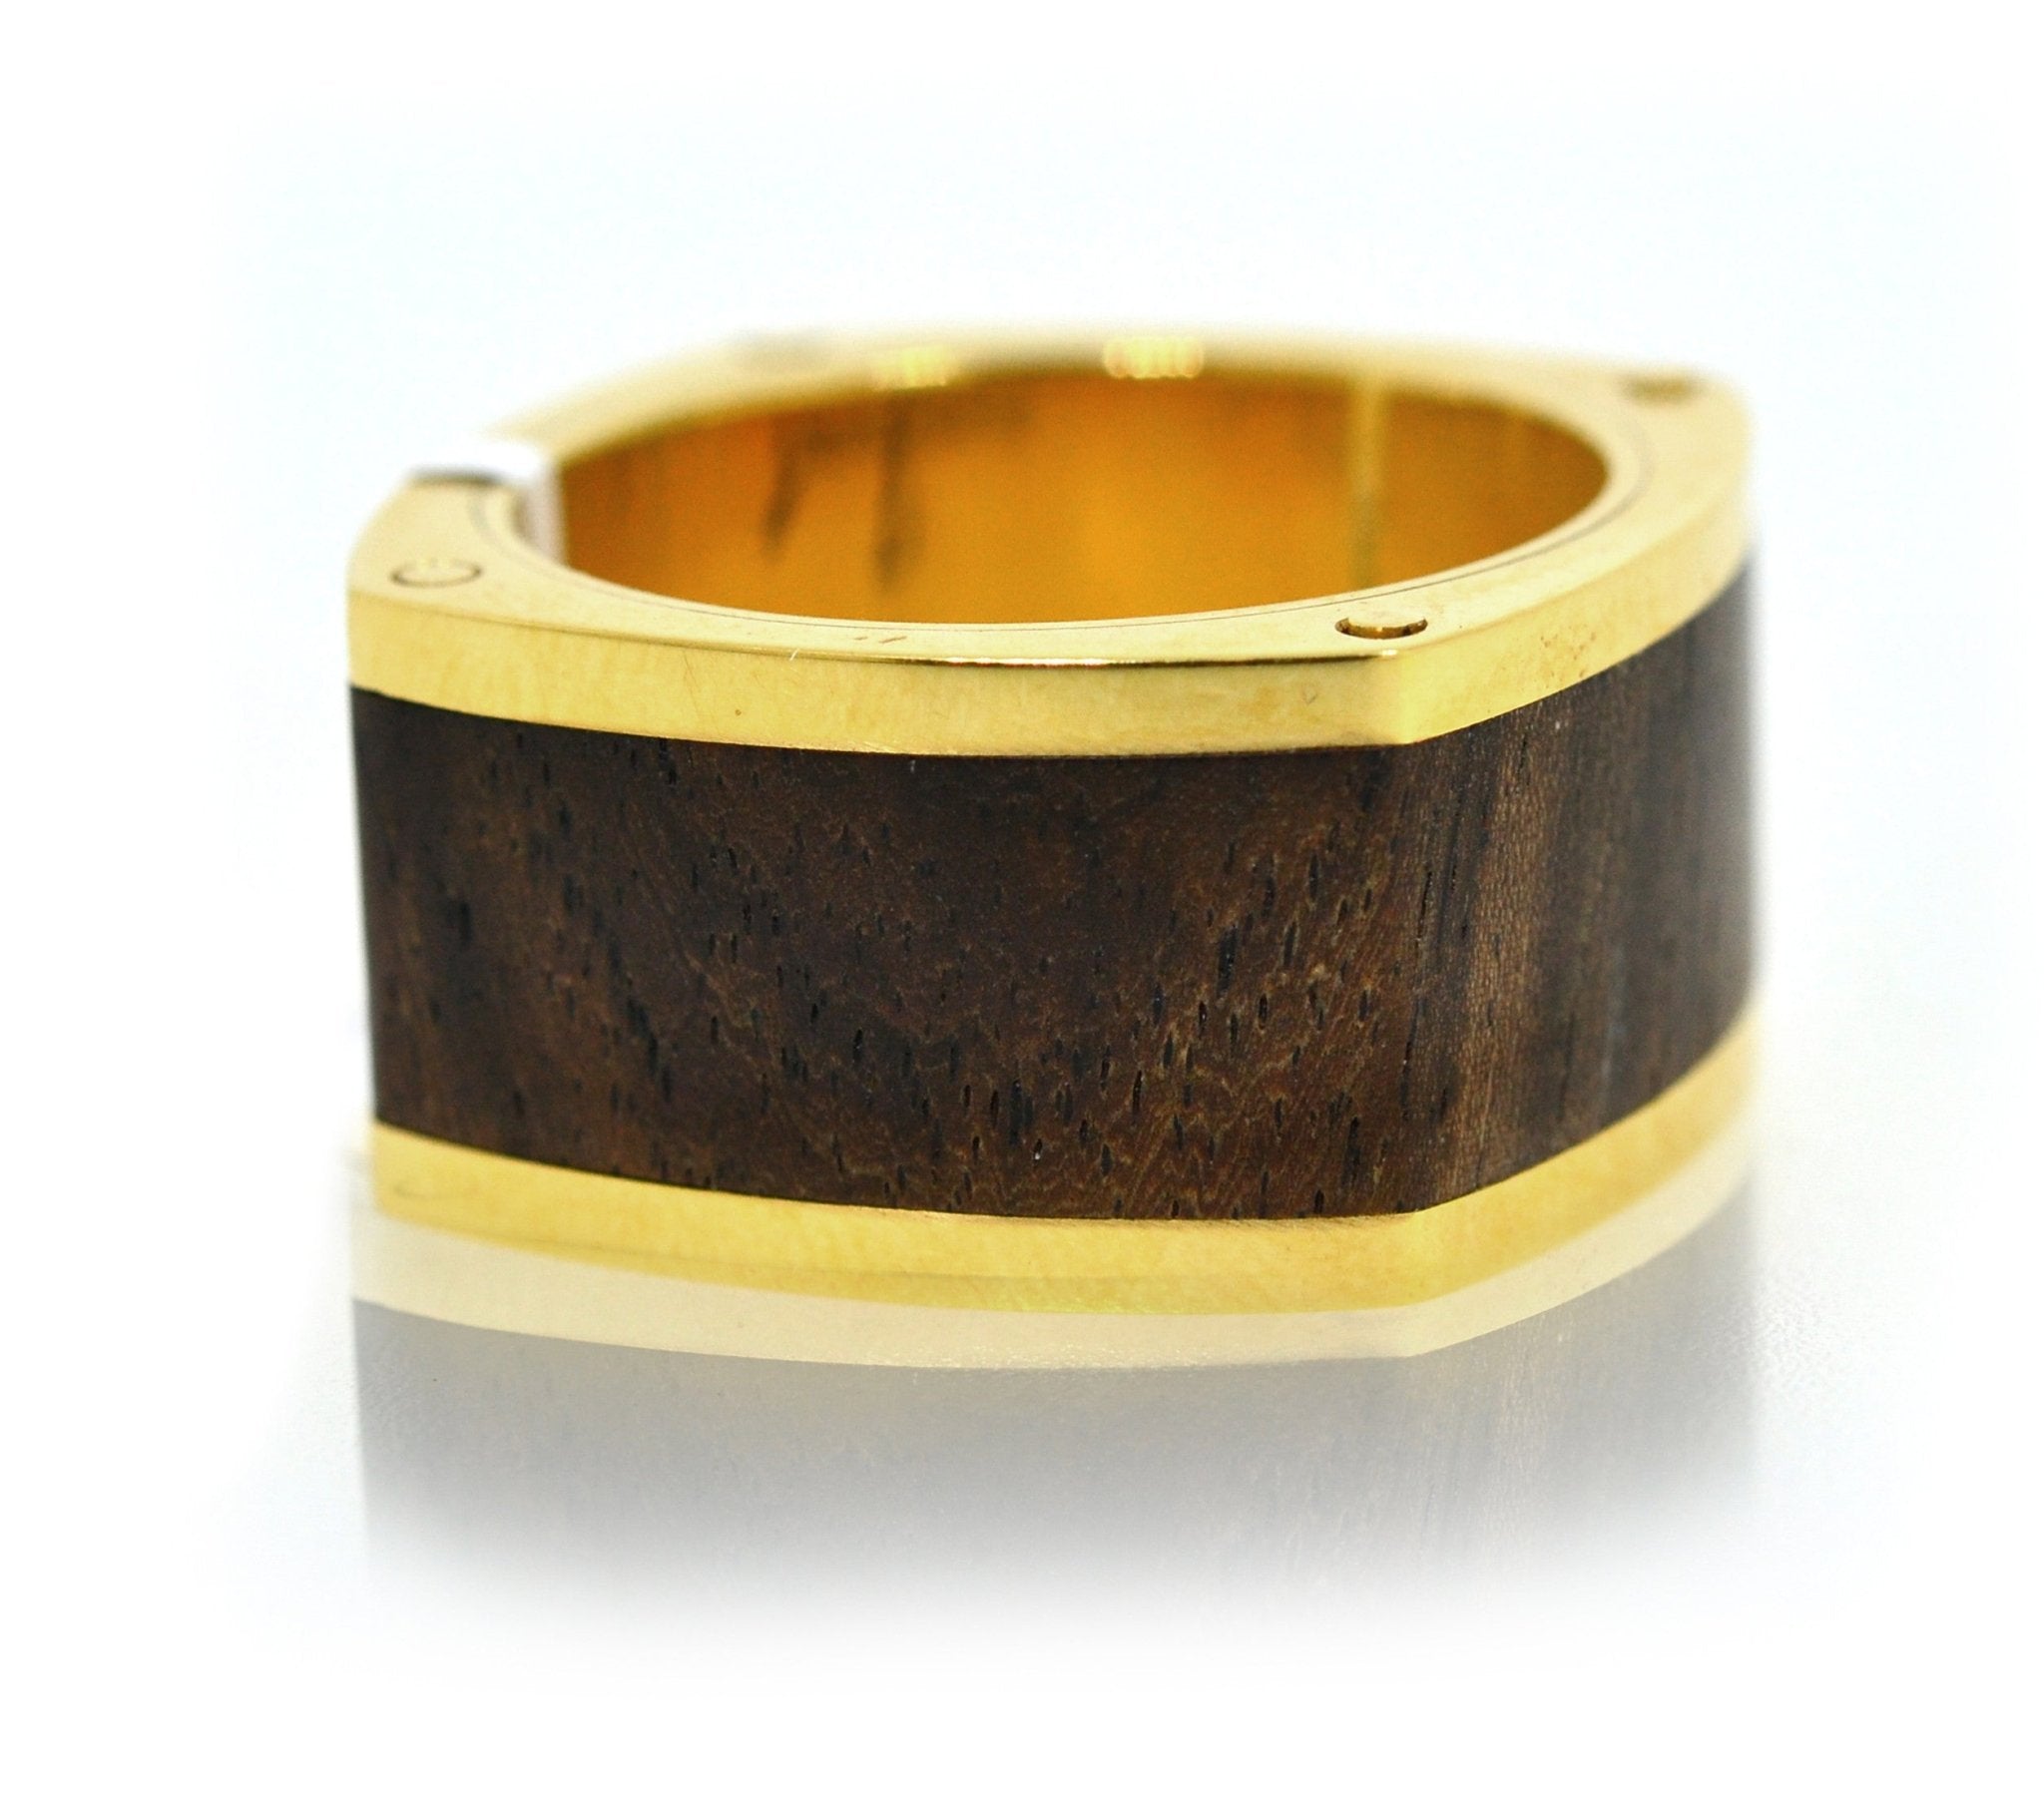 Gents Ring 18k Yellow Gold with Ebony Wood Inlay - ForeverJewels Design Studio 8